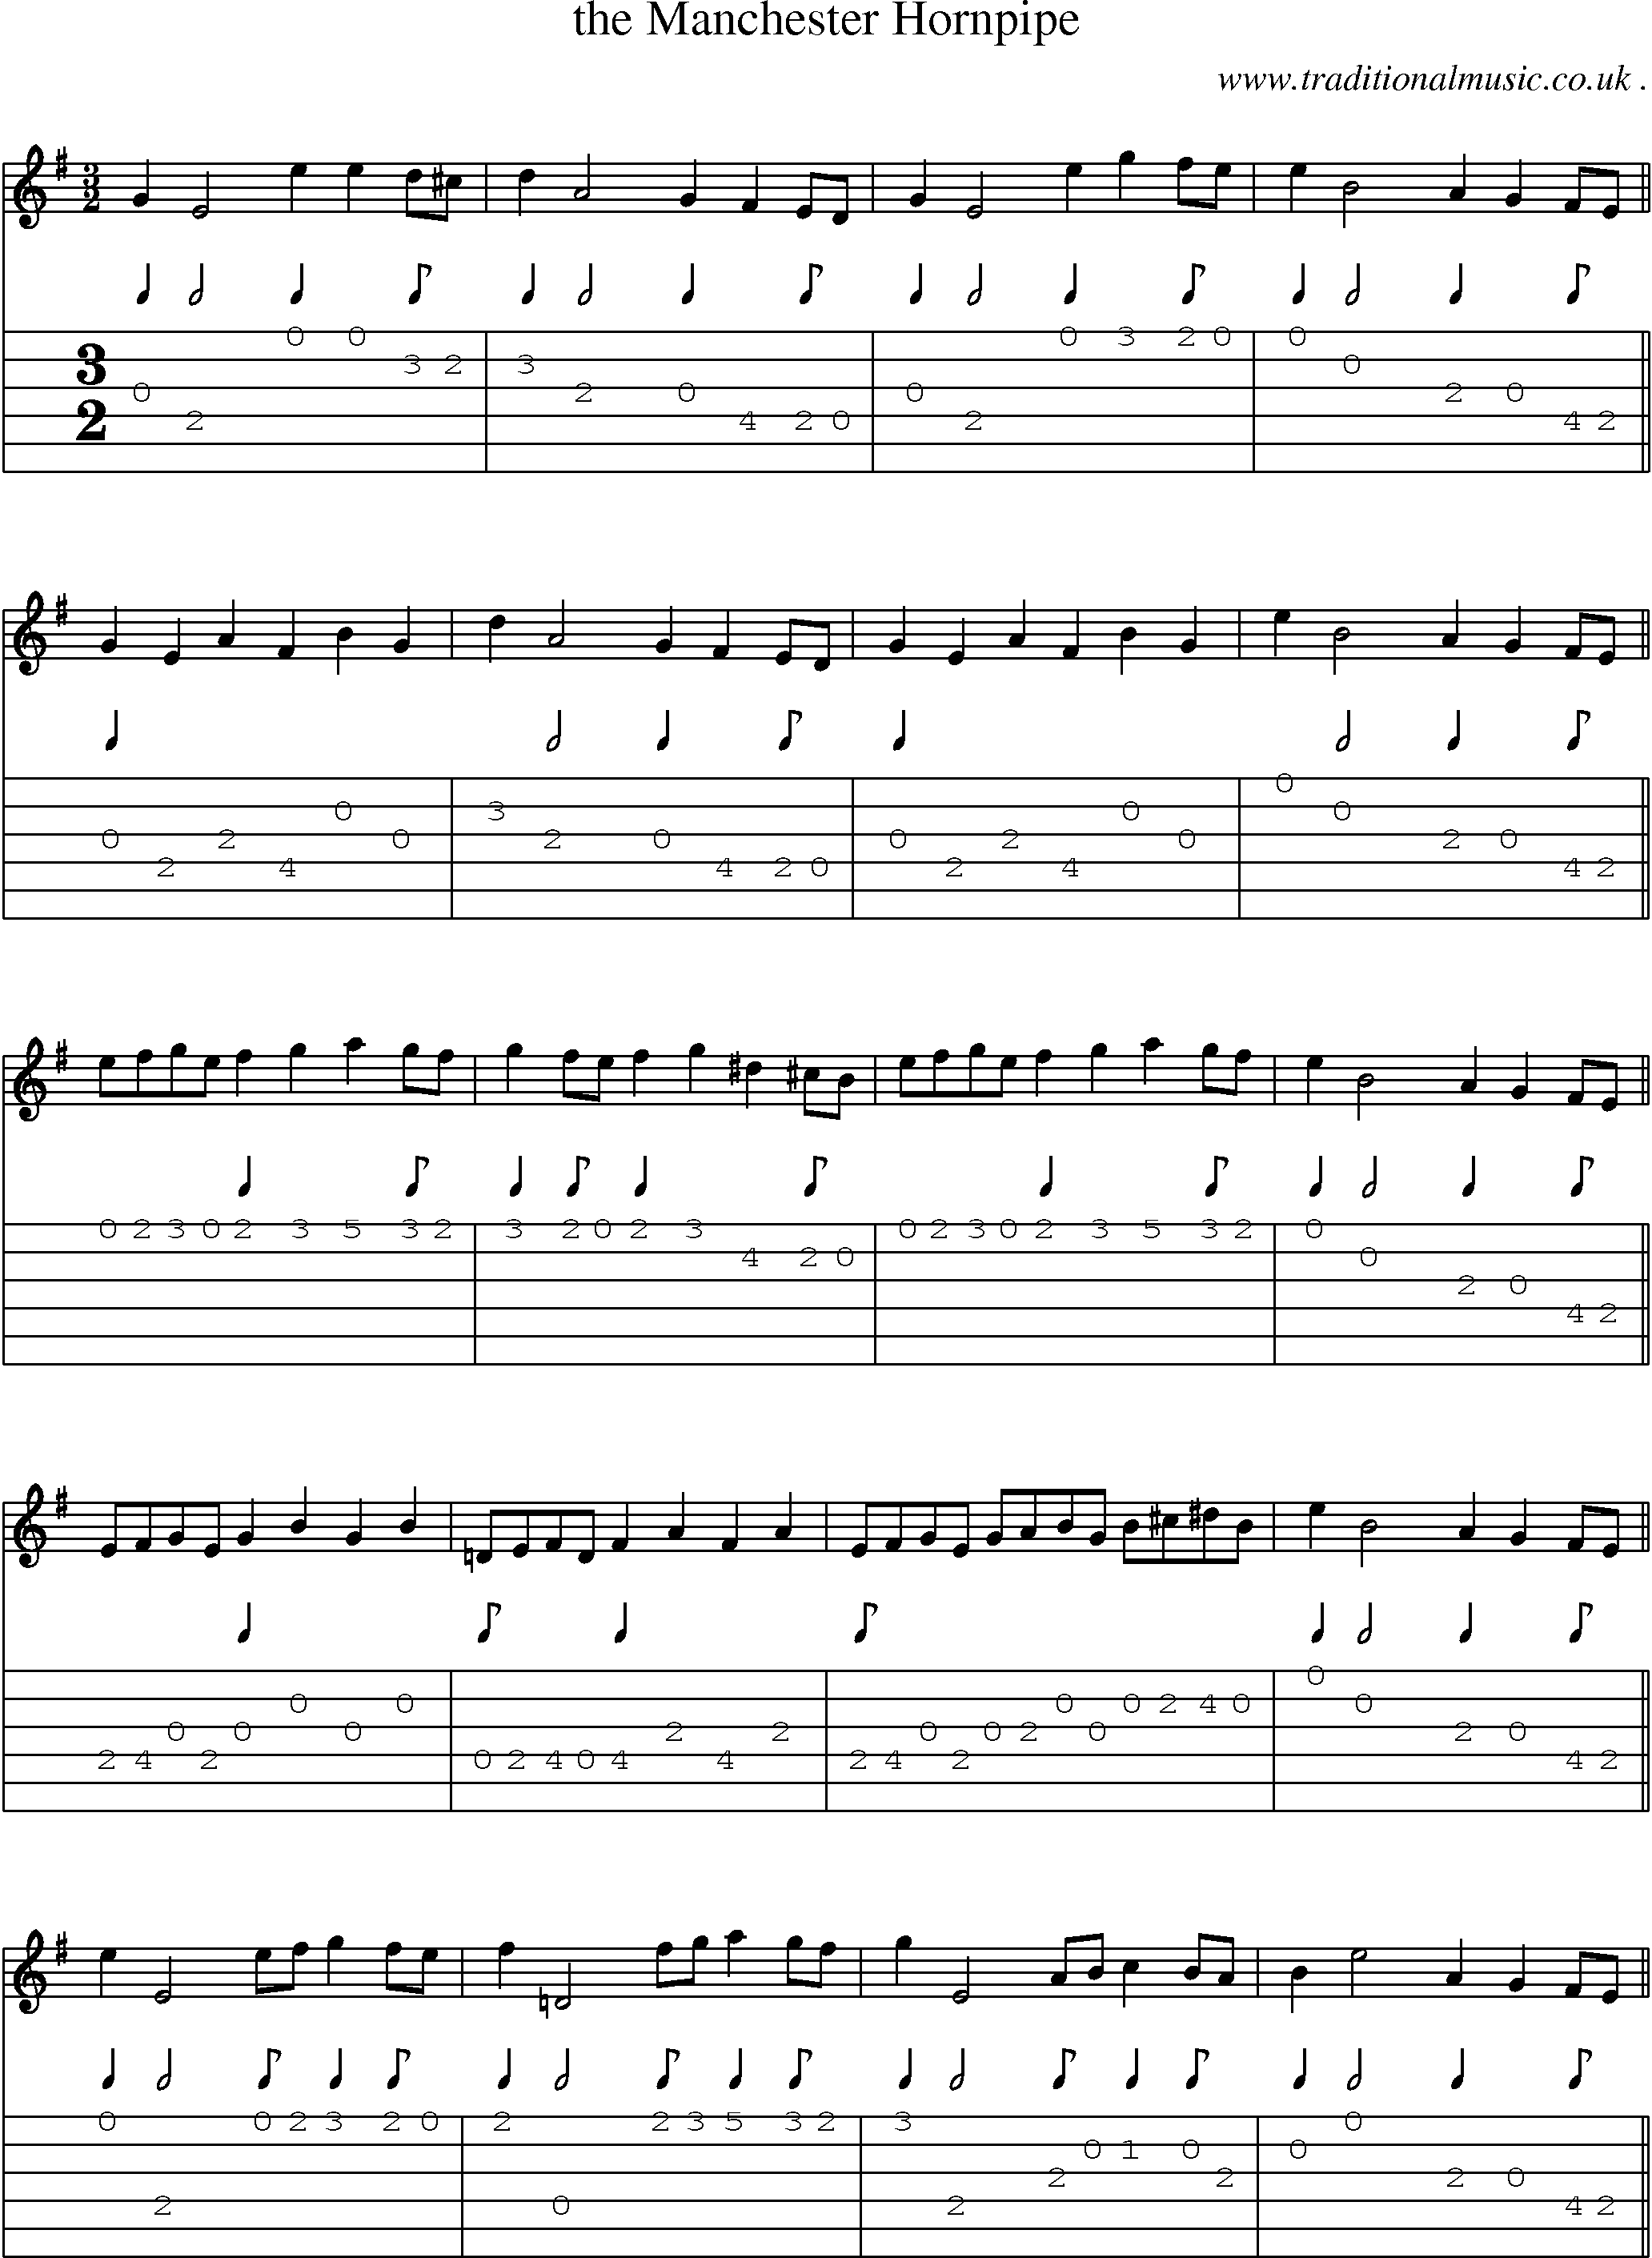 Sheet-Music and Guitar Tabs for The Manchester Hornpipe